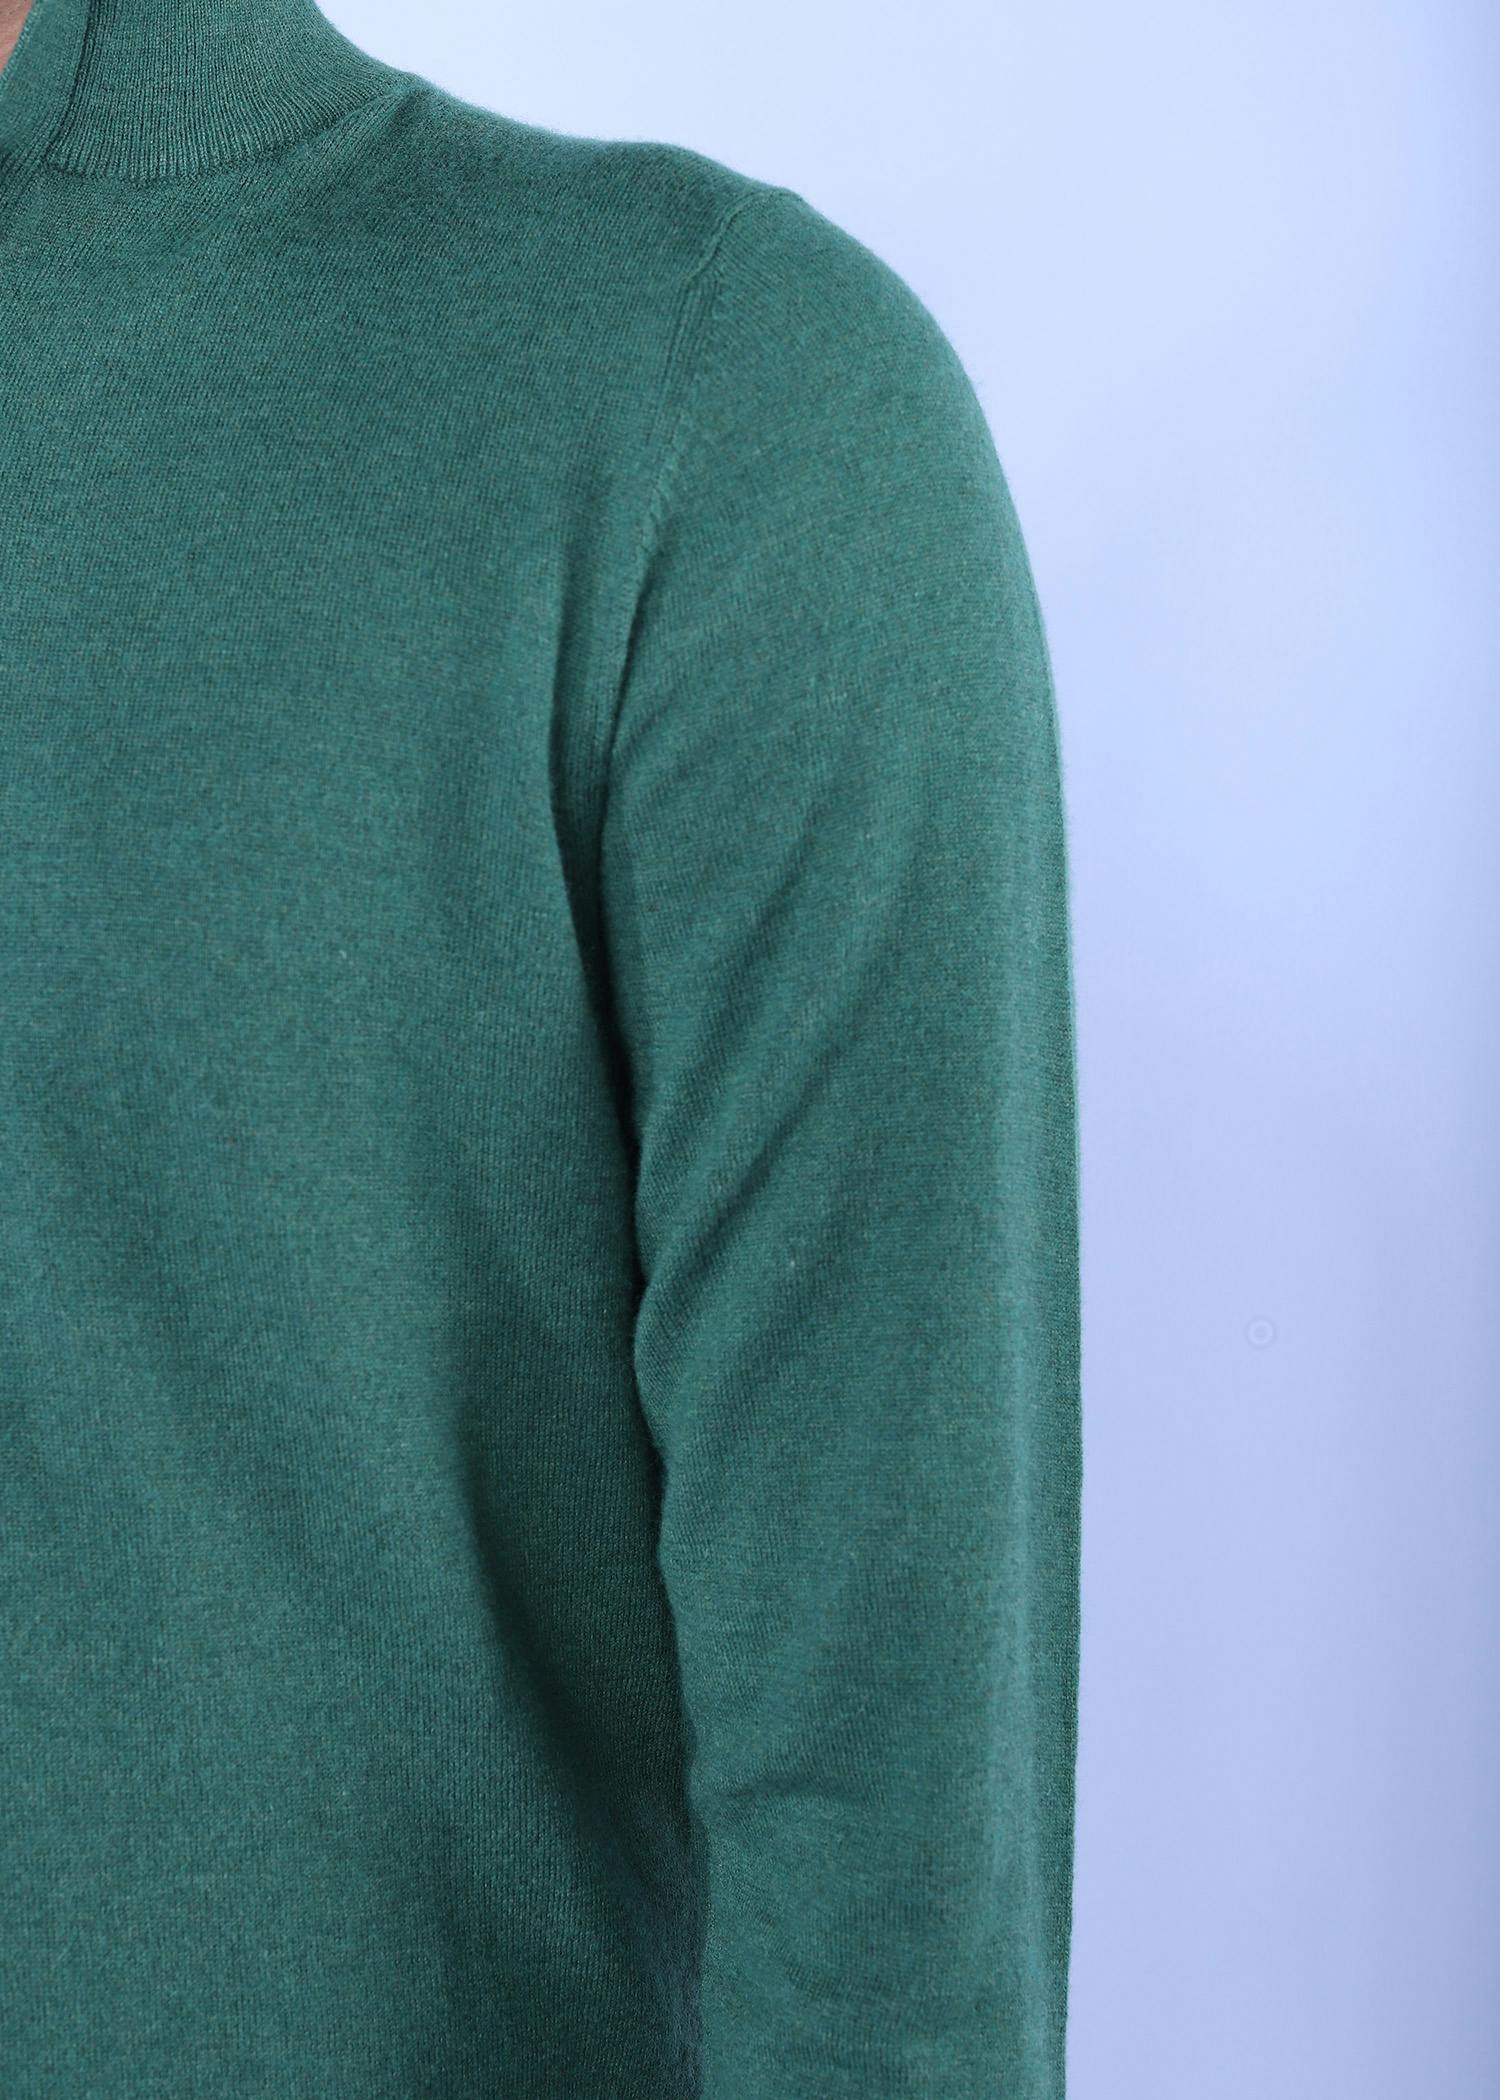 hornero i sweater green color close front view